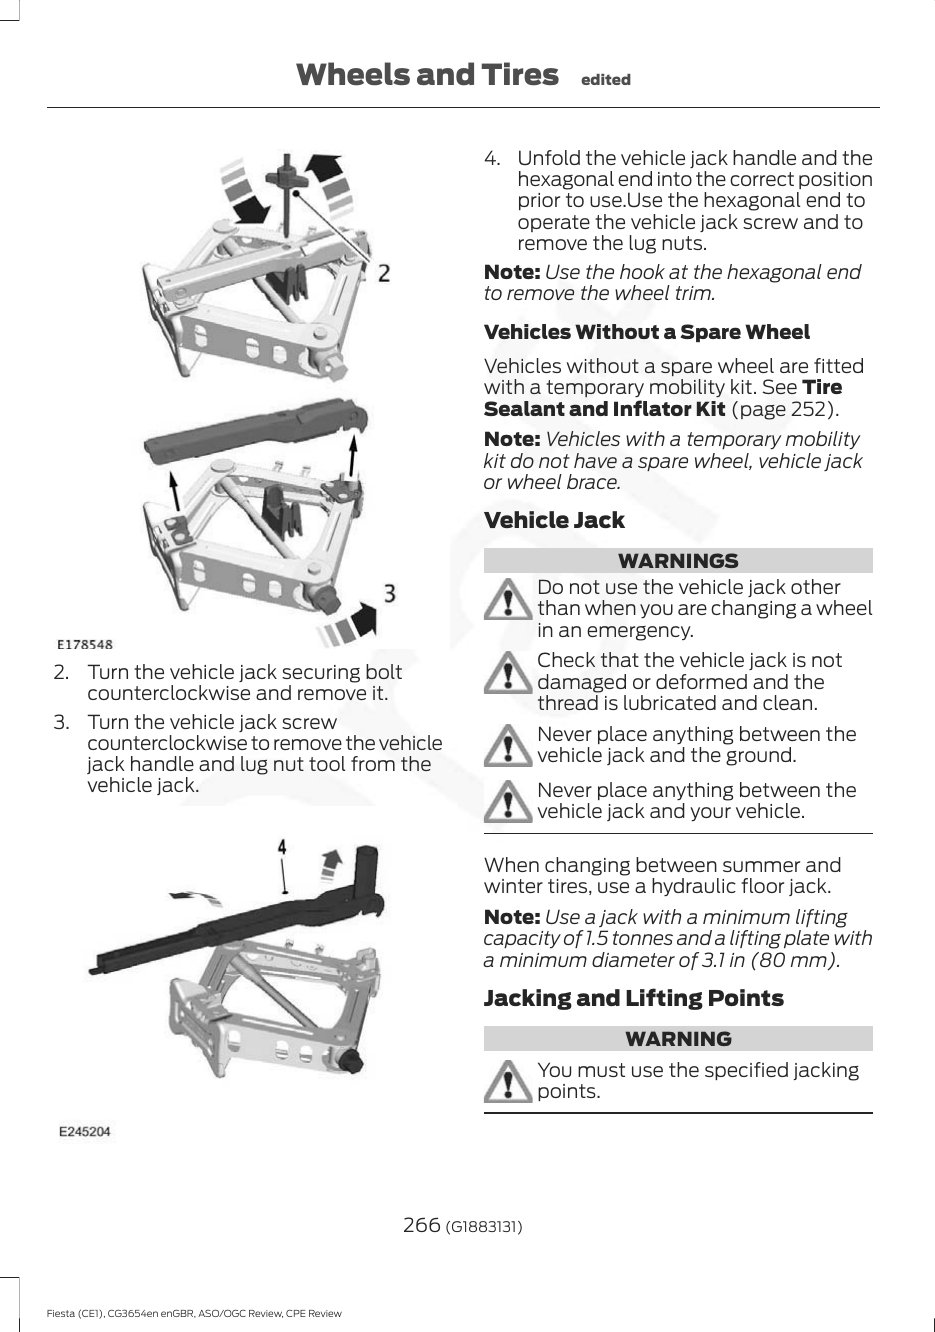 2. Turn the vehicle jack securing boltcounterclockwise and remove it.3. Turn the vehicle jack screwcounterclockwise to remove the vehiclejack handle and lug nut tool from thevehicle jack.4. Unfold the vehicle jack handle and thehexagonal end into the correct positionprior to use.Use the hexagonal end tooperate the vehicle jack screw and toremove the lug nuts.Note: Use the hook at the hexagonal endto remove the wheel trim.Vehicles Without a Spare WheelVehicles without a spare wheel are fittedwith a temporary mobility kit. See TireSealant and Inflator Kit (page 252).Note: Vehicles with a temporary mobilitykit do not have a spare wheel, vehicle jackor wheel brace.Vehicle JackWARNINGSDo not use the vehicle jack otherthan when you are changing a wheelin an emergency.Check that the vehicle jack is notdamaged or deformed and thethread is lubricated and clean.Never place anything between thevehicle jack and the ground.Never place anything between thevehicle jack and your vehicle.When changing between summer andwinter tires, use a hydraulic floor jack.Note: Use a jack with a minimum liftingcapacity of 1.5 tonnes and a lifting plate witha minimum diameter of 3.1 in (80 mm).Jacking and Lifting PointsWARNINGYou must use the specified jackingpoints.266 (G1883131)Fiesta (CE1), CG3654en enGBR, ASO/OGC Review, CPE ReviewWheels and Tires edited